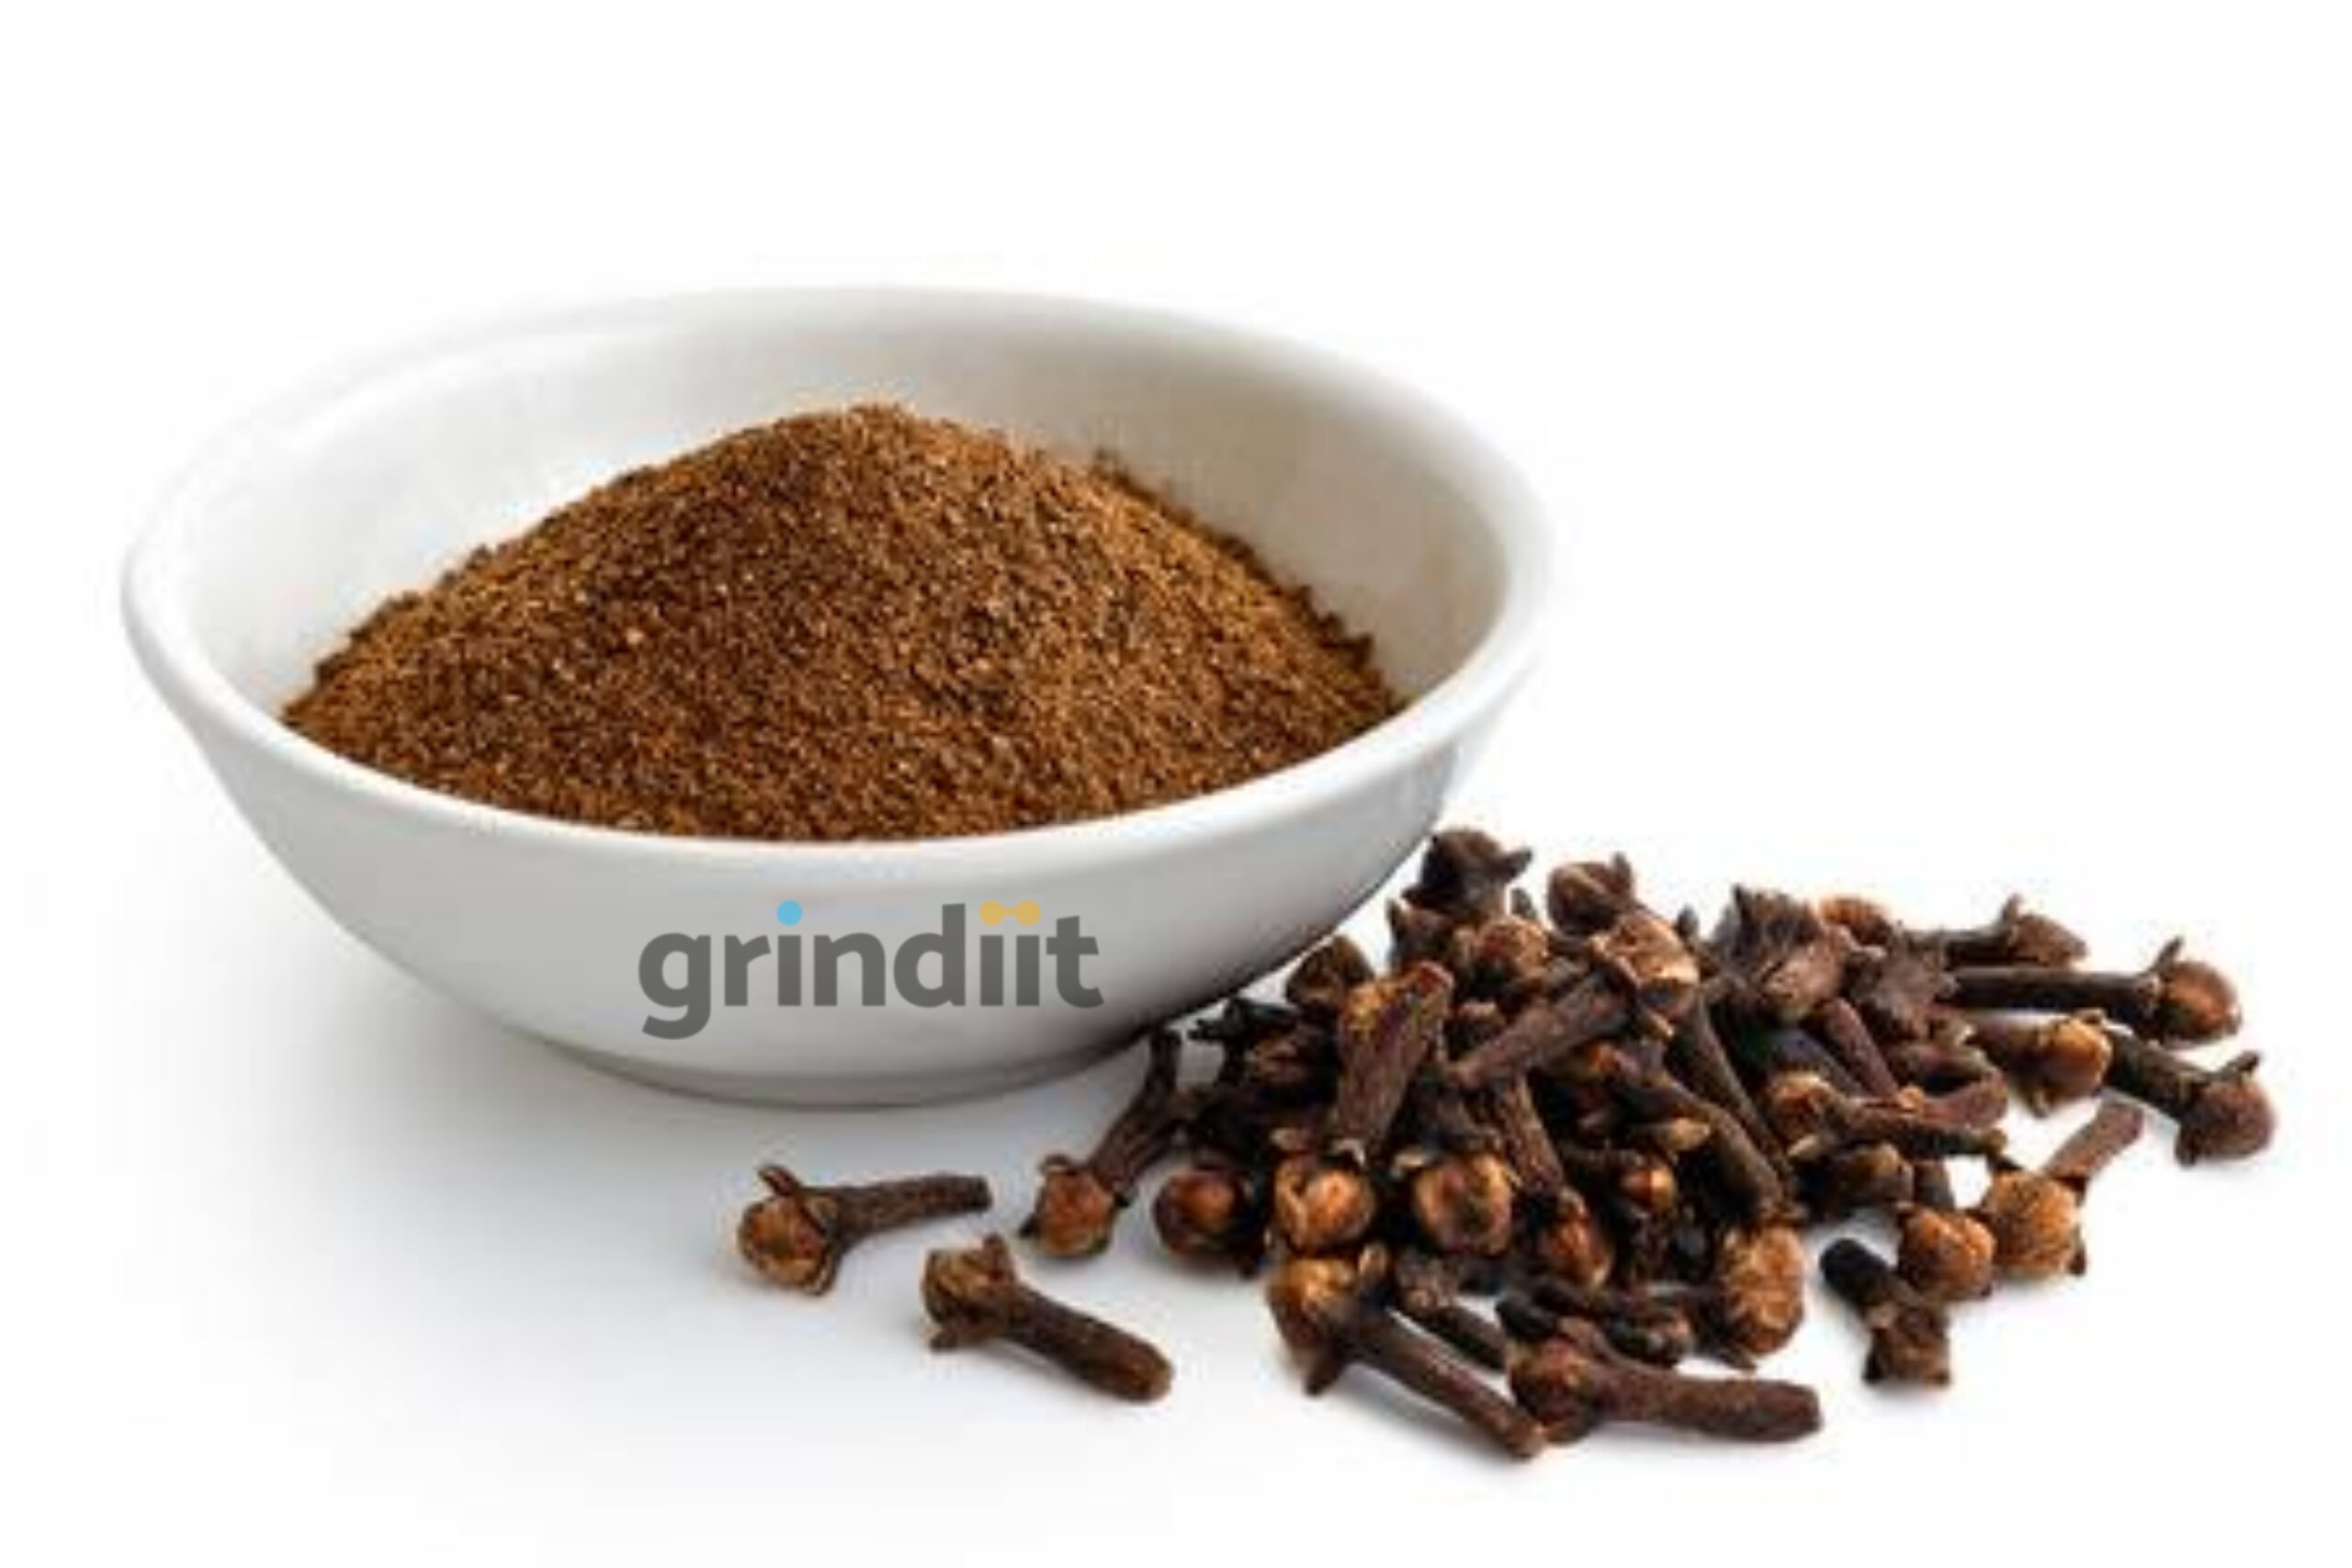 Food processor dry grinding,  Best way to grind spices,  Spice grinder,  How do I grind herbs without a mortar and pestle,  Cinnamon grinder,  Can you use a burr grinder for spices,  Can you grind spices in a coffee grinder,  Mortar and pestle vs spice grinder, 